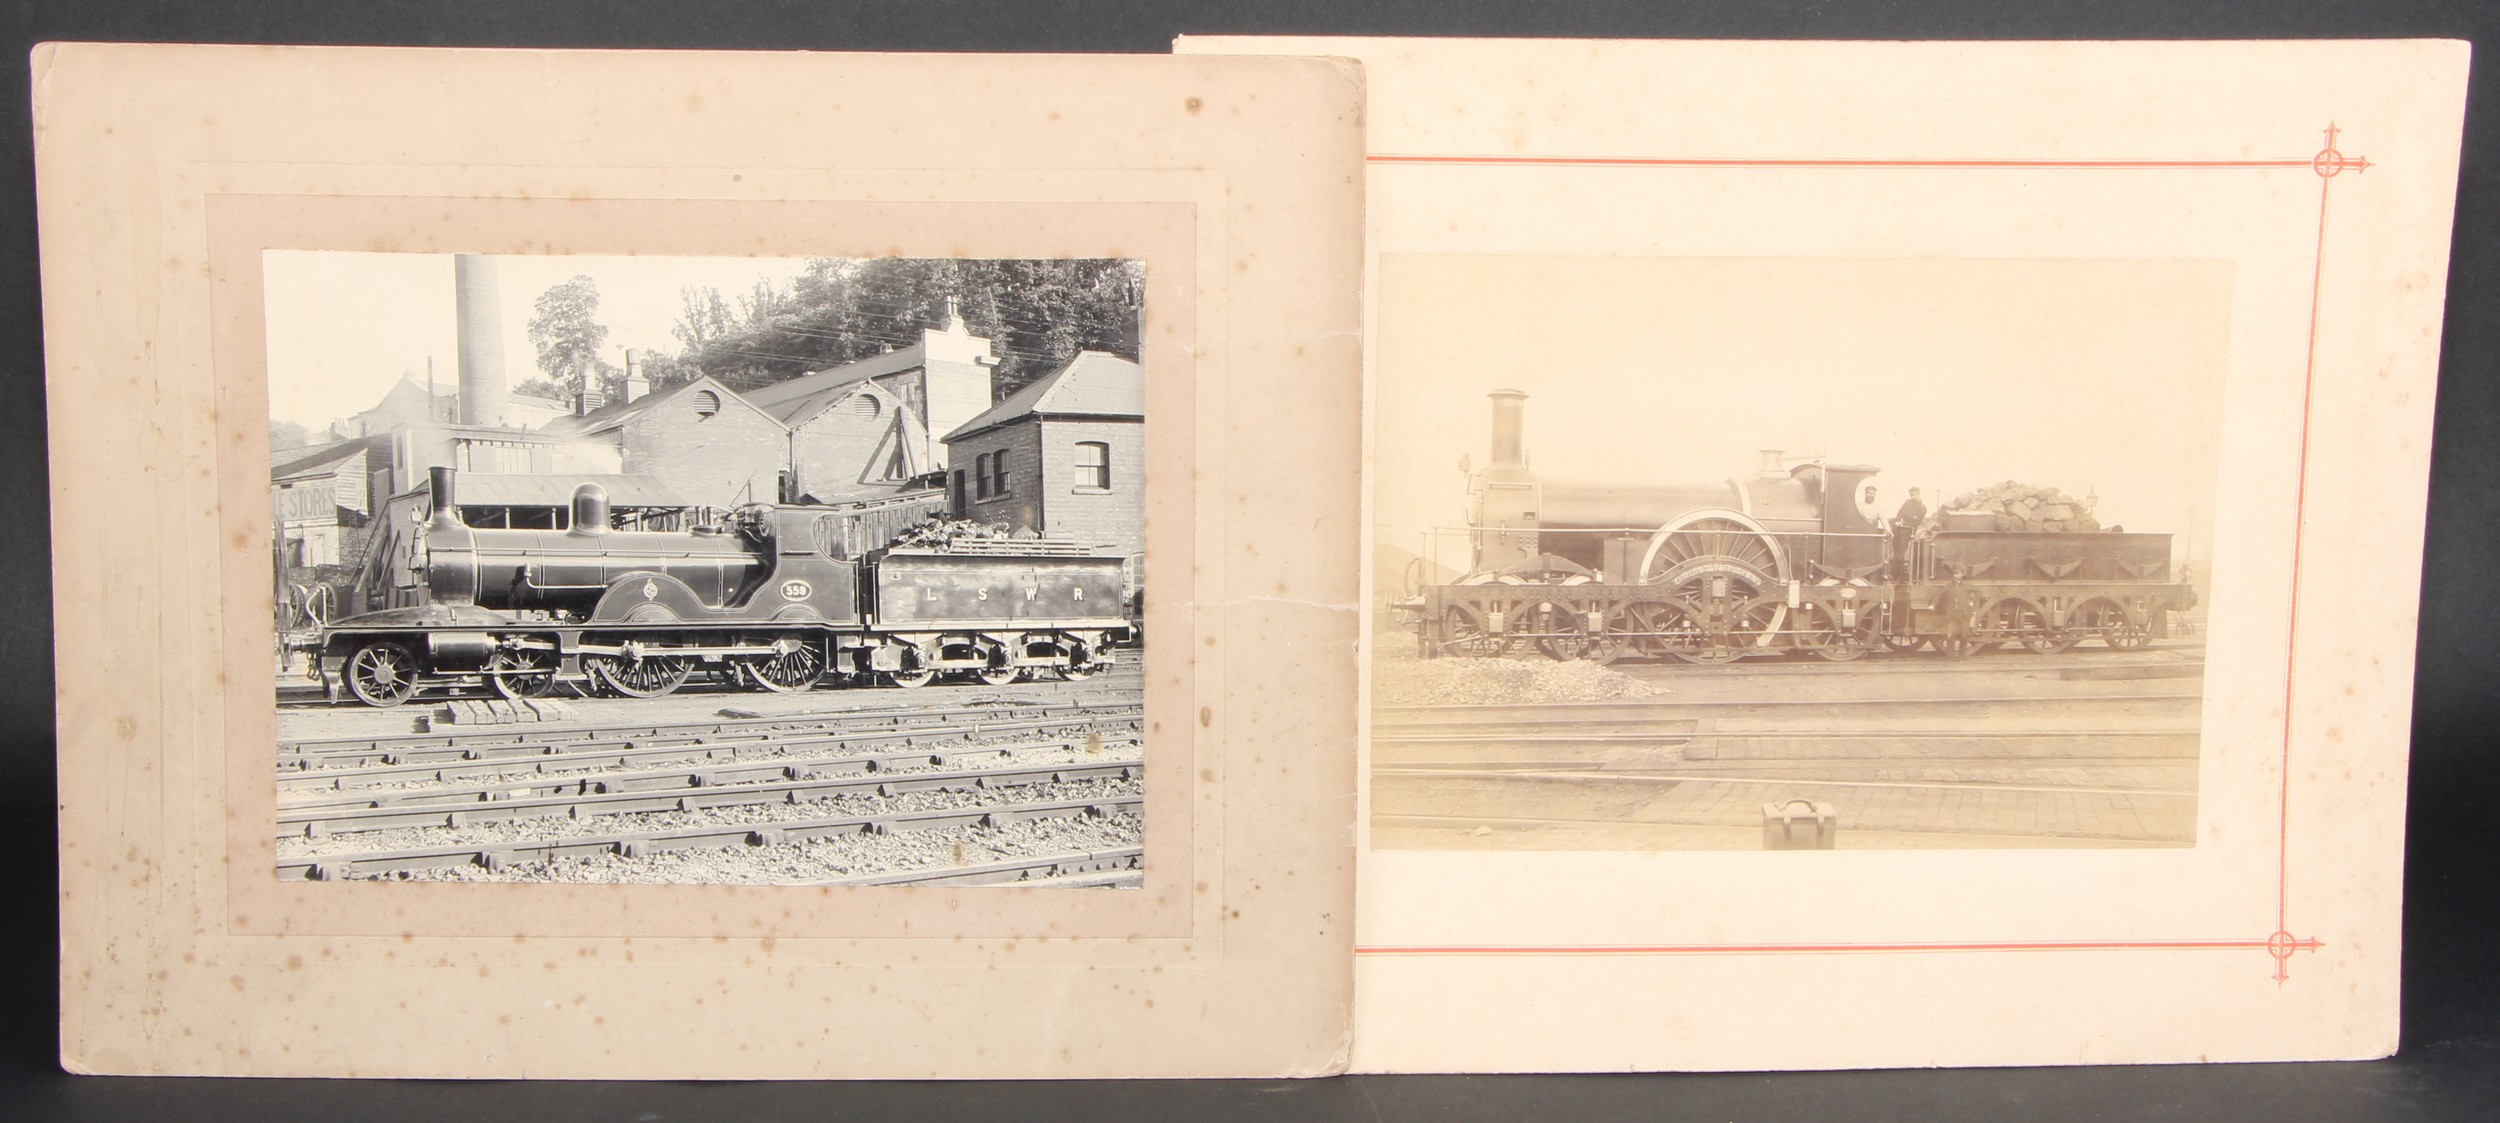 Photography - Railwayana - a collection of 19th century photographs of railway locomotives, many - Image 5 of 8